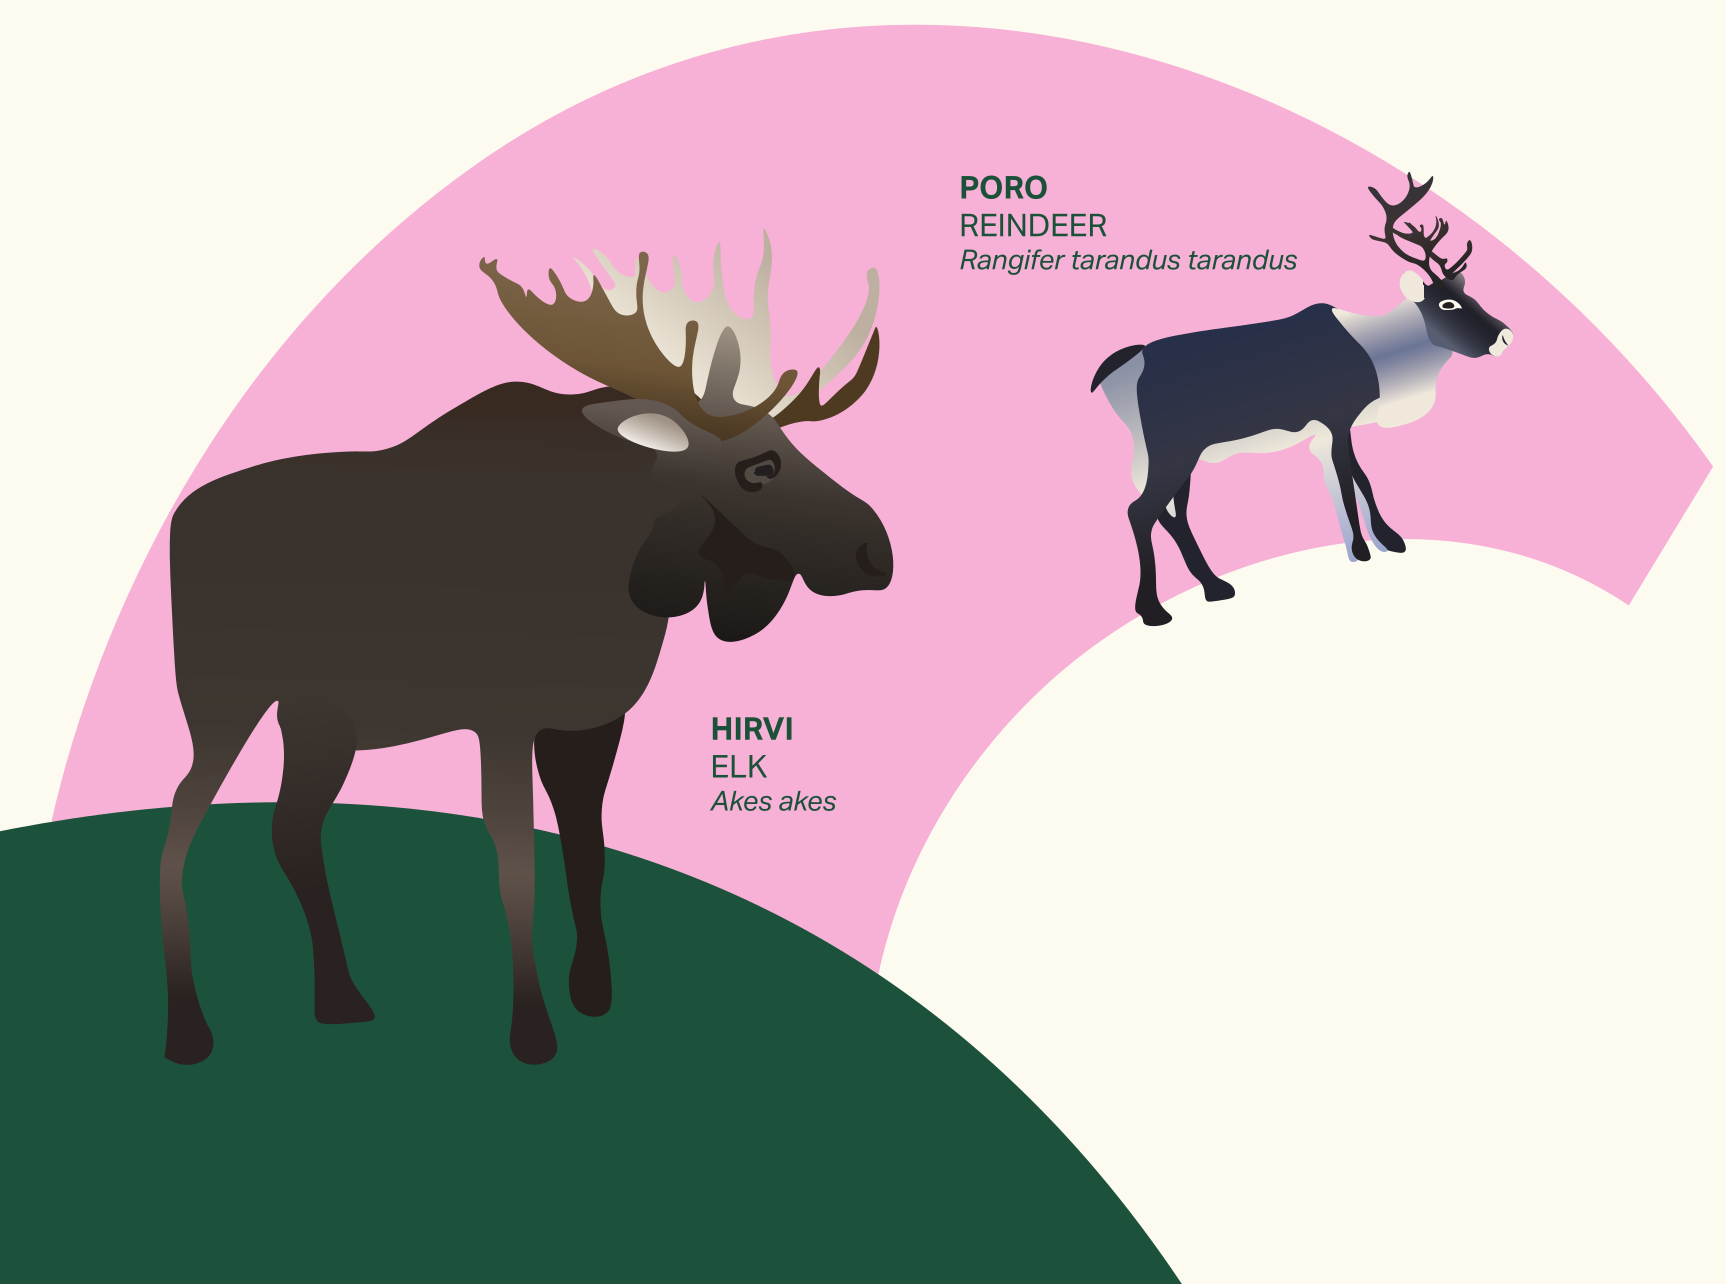 Image of an elk and a reindeer